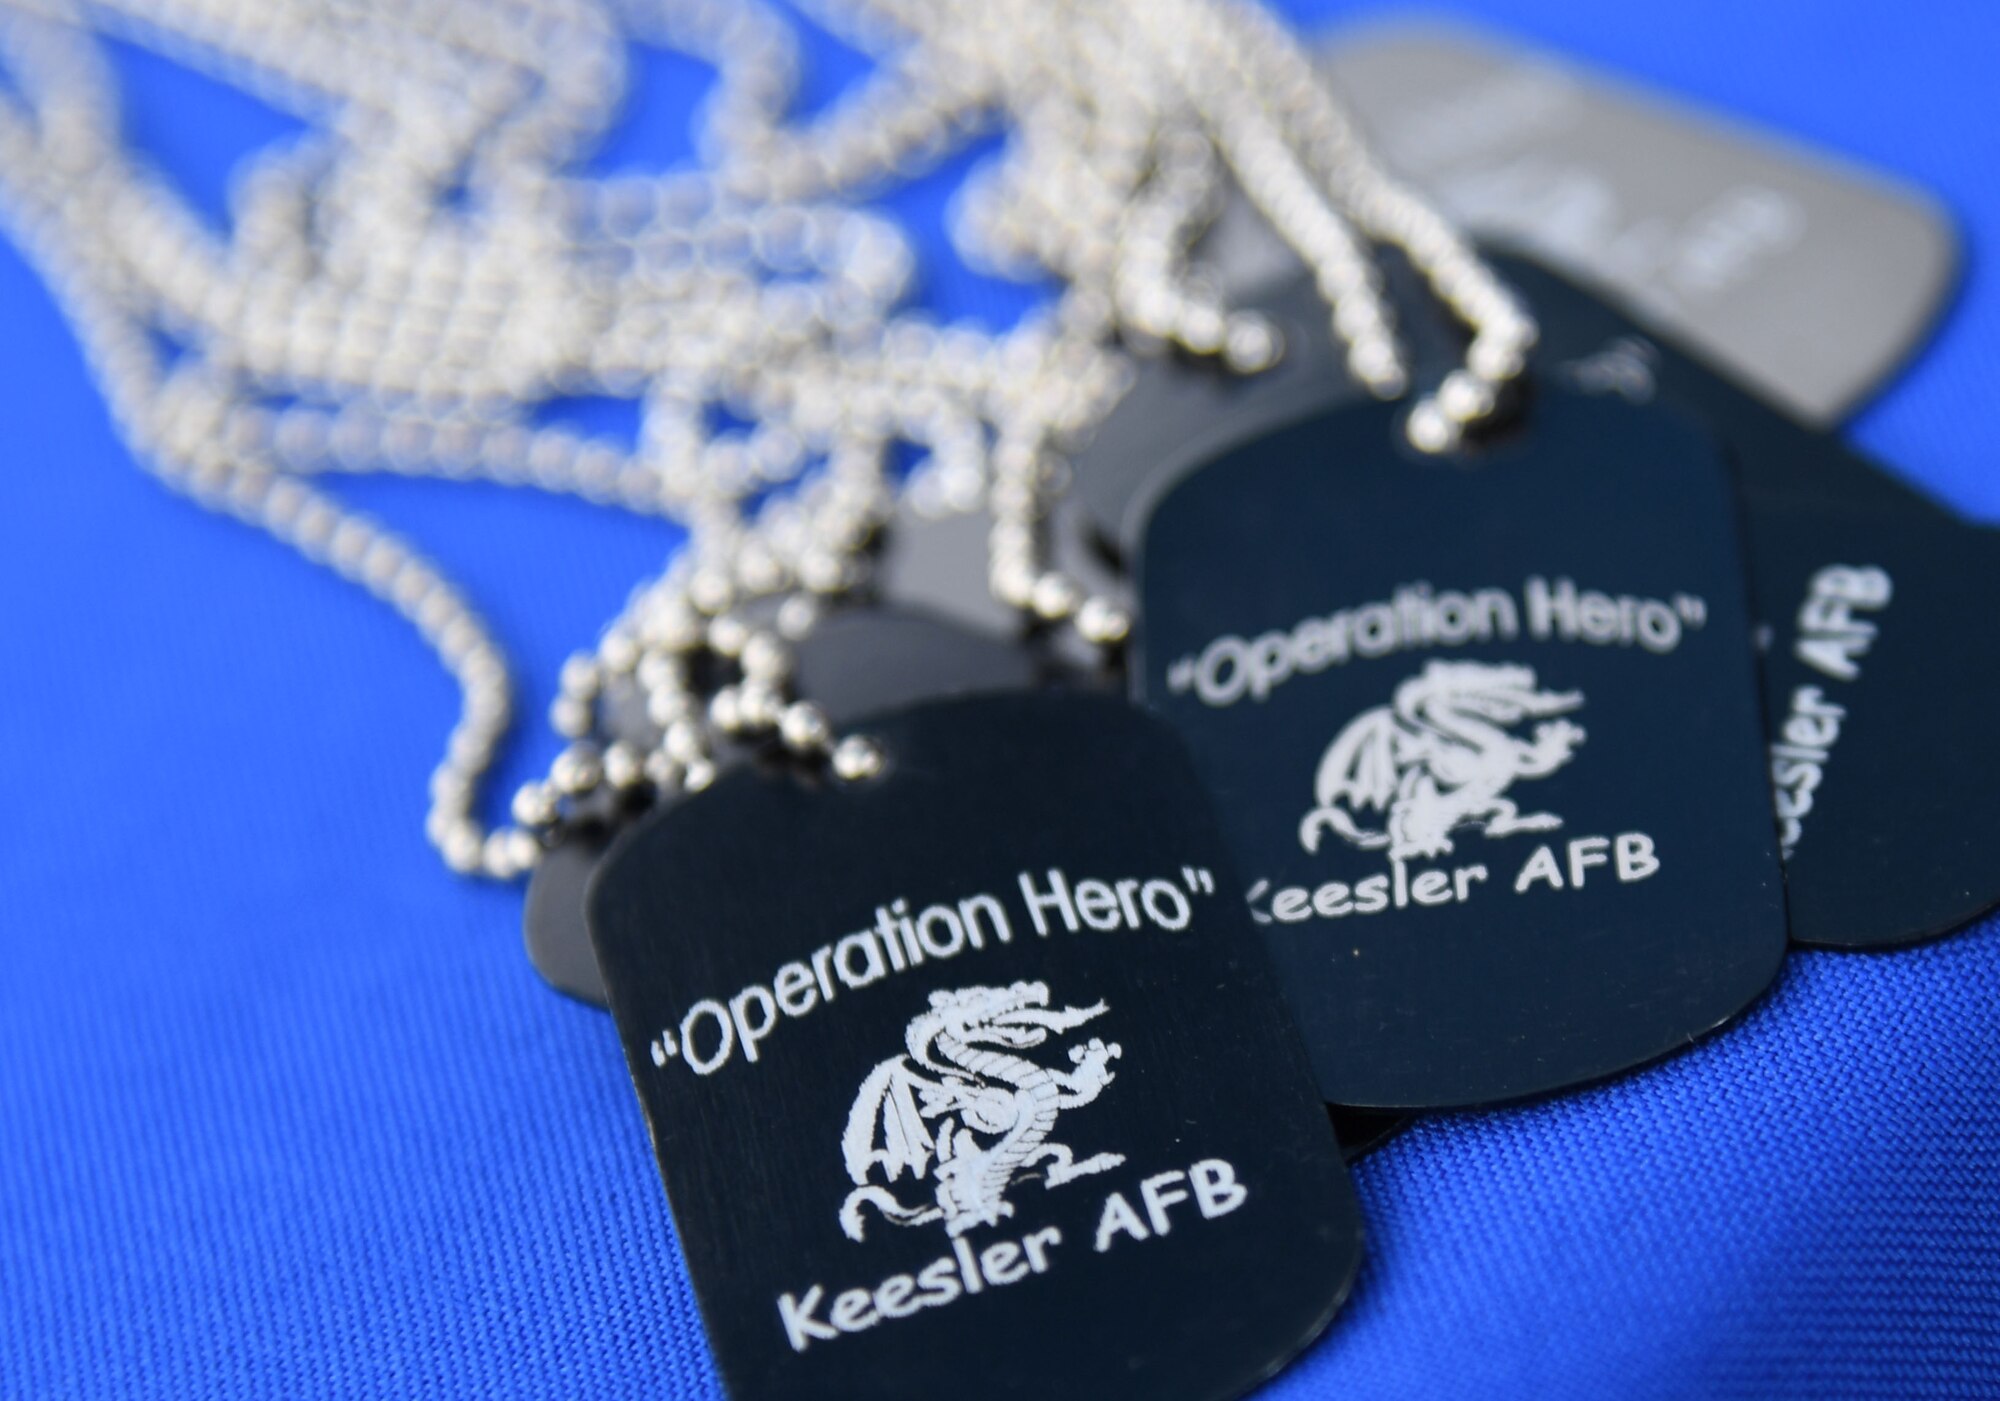 Operation Hero dog tags are on display during Operation Hero at Keesler Air Force Base, Mississippi, April 2, 2022. The event, hosted by the Airman and Family Readiness Center in recognition of the Month of the Military Child, gave military children a glimpse into the lives of deployed military members. Children received Operation Hero dog tags and t-shirts as they made their way through a mock deployment line as well as the opportunity to experience medical triage demonstrations, military working dog demonstrations and have their faces painted. (U.S. Air Force photo by Kemberly Groue)